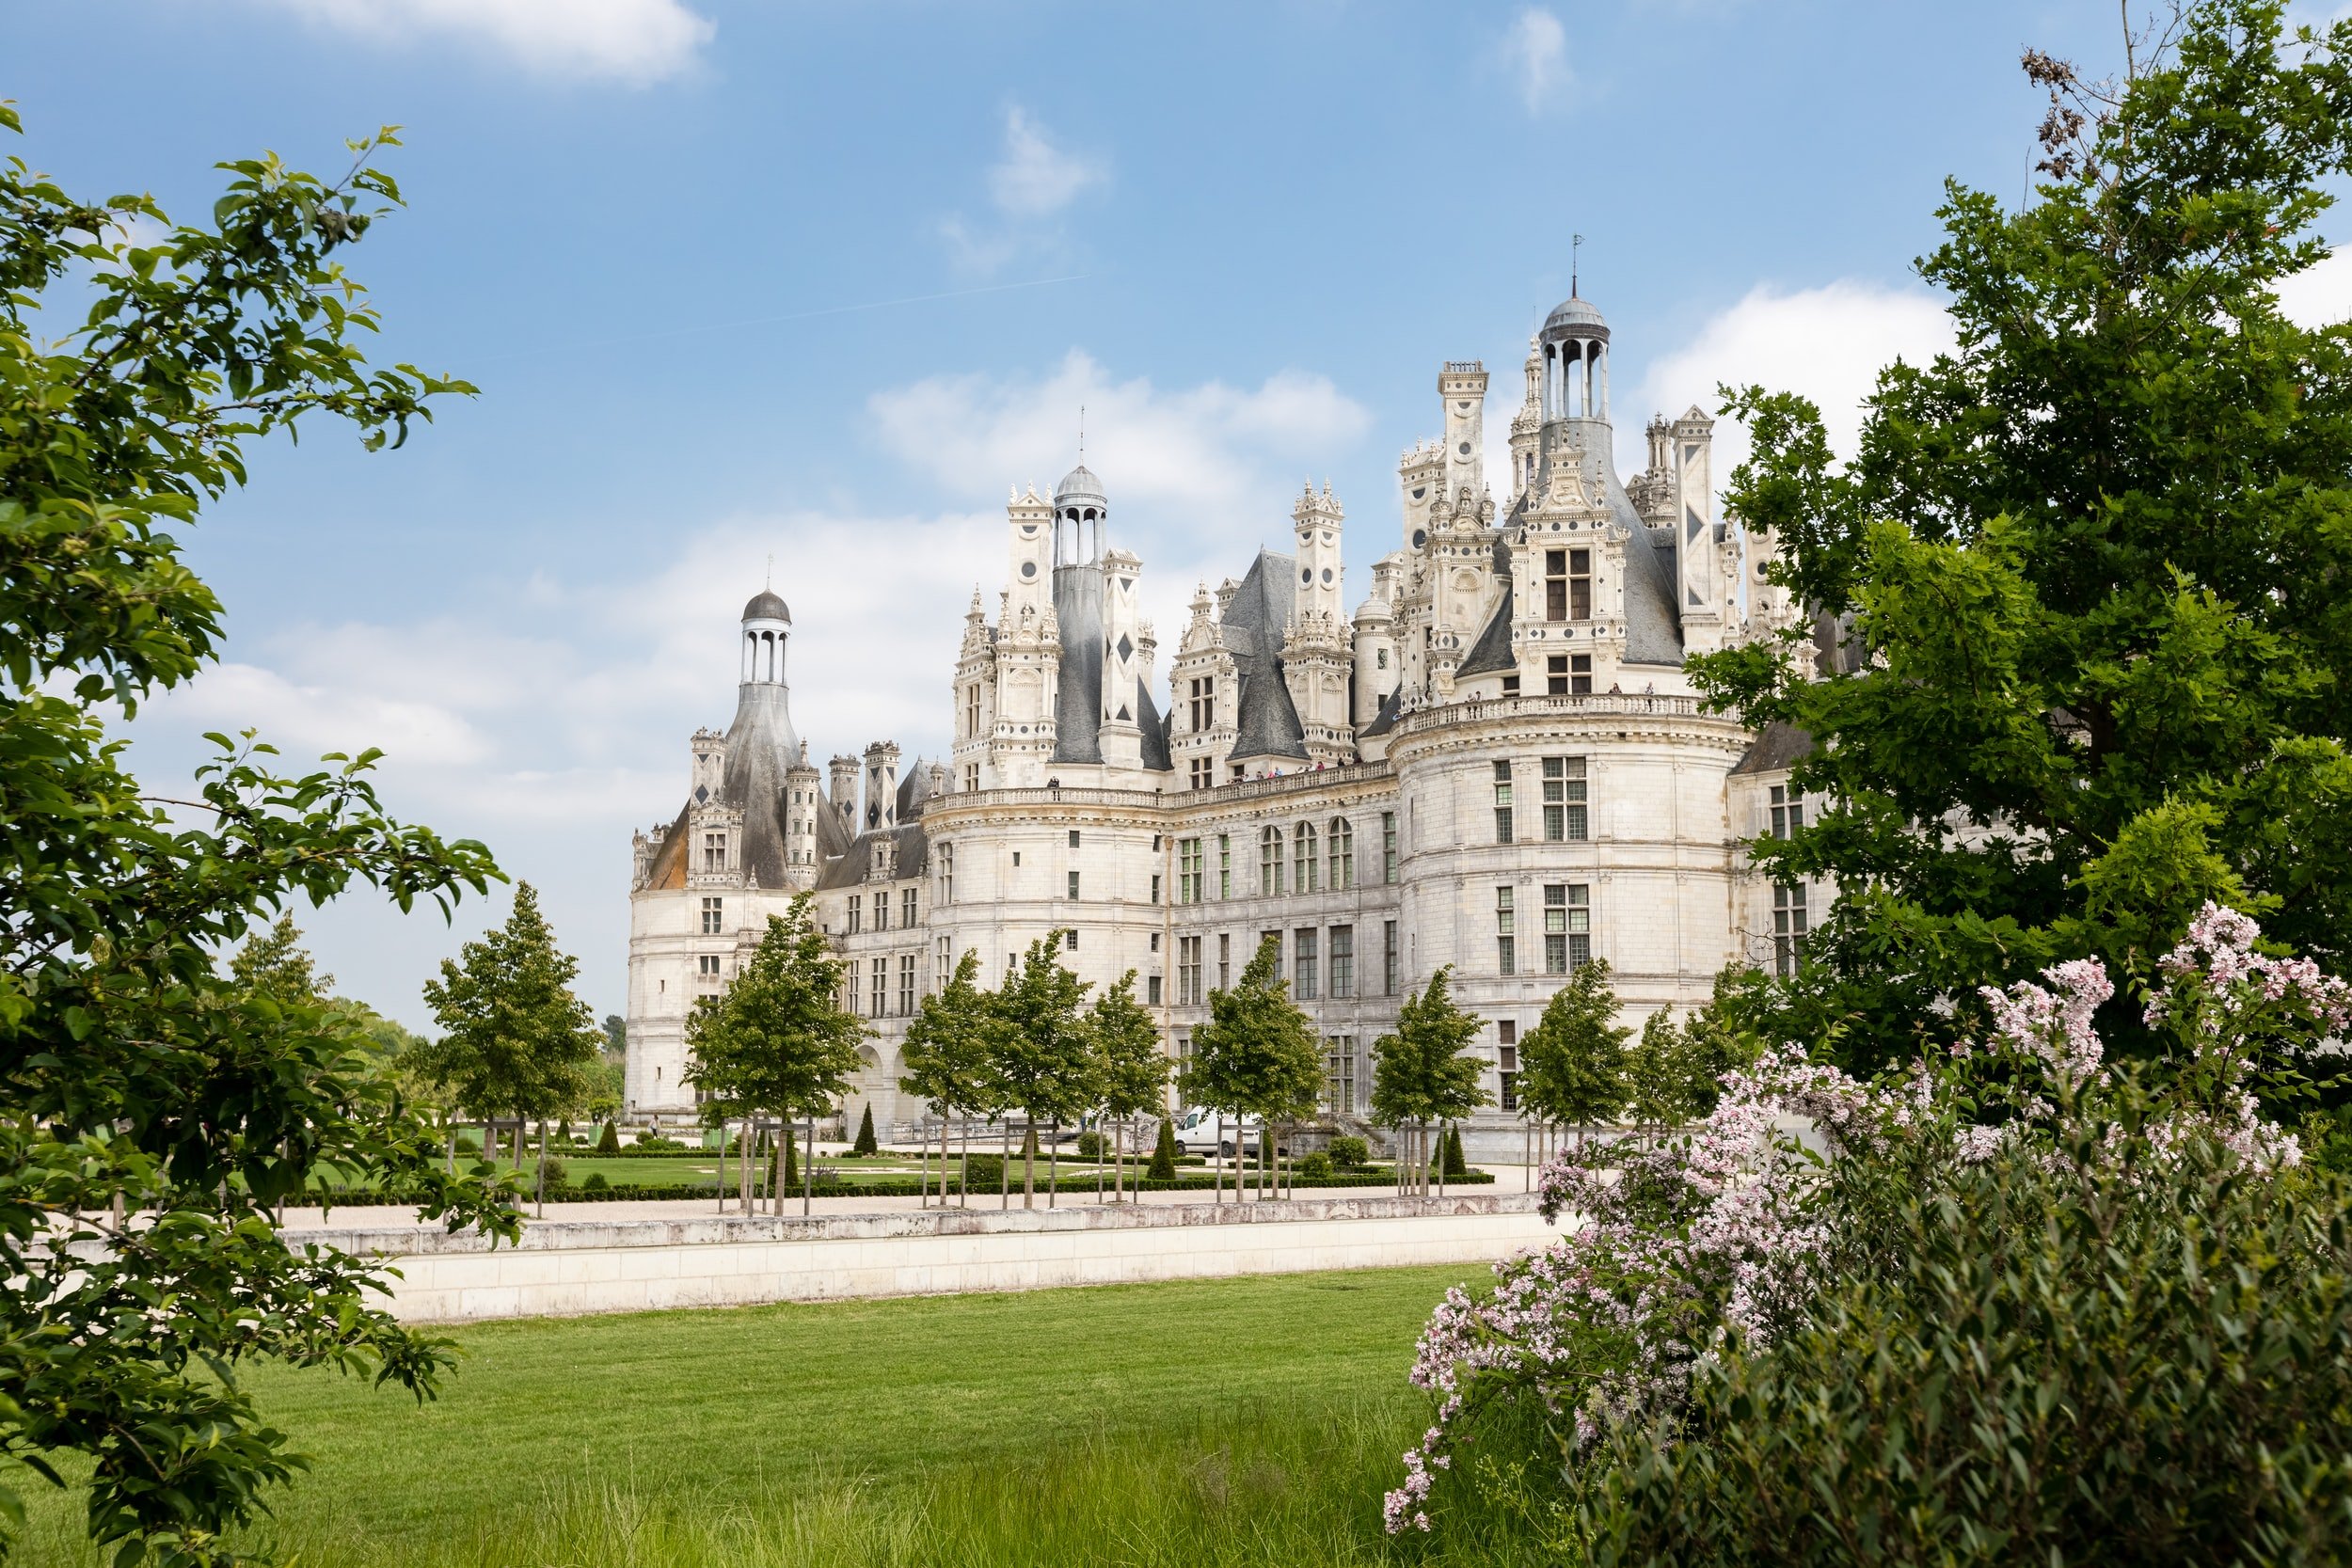 Visit the châteaux of the Loire Valley, such as Chambord, during your seminar